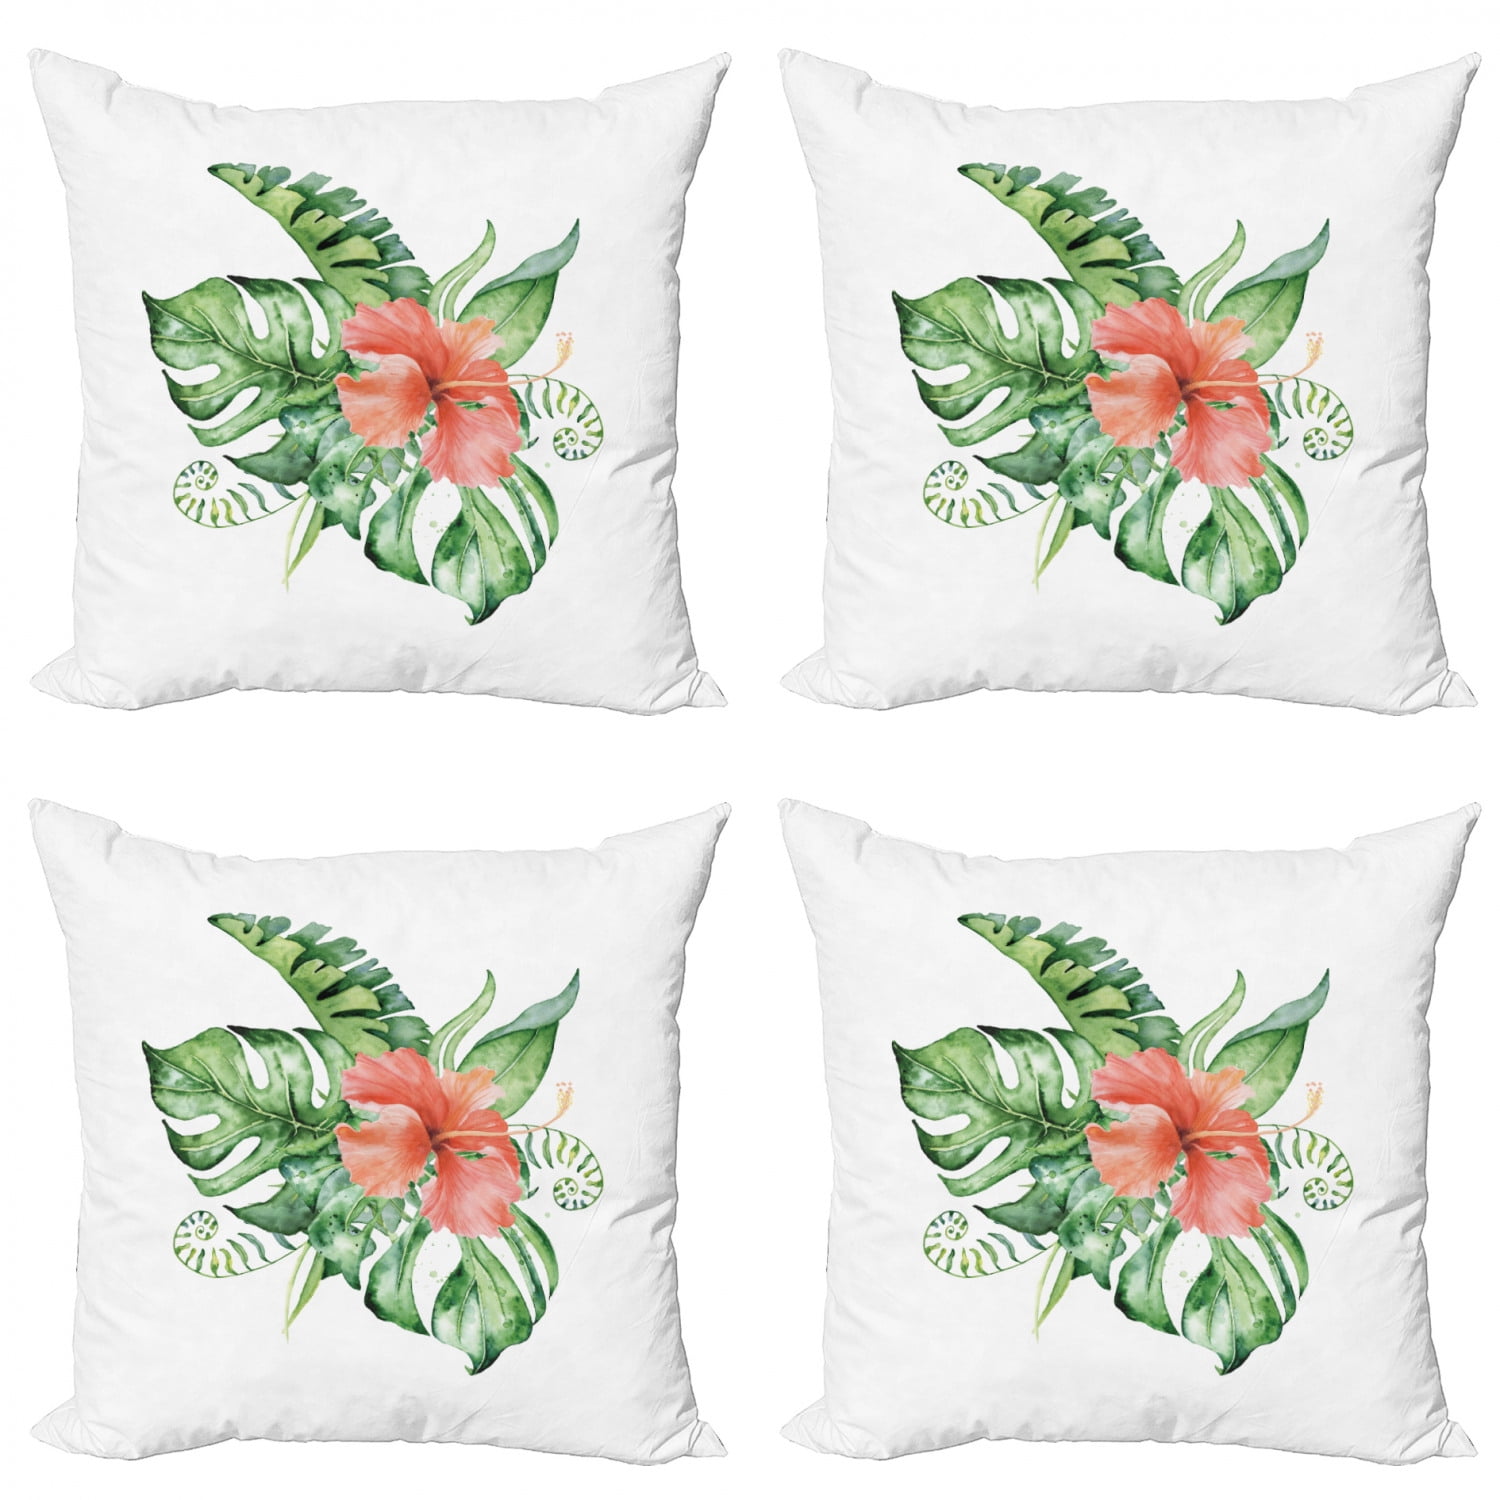 Bouquets of Blooming Rose Flowers Leaves and Buds Spring Season Ambesonne Summer Pink Decorative Throw Pillow Case Pack of 4 Cushion Cover for Couch Living Room Car Baby Blue and Lime Green 16 